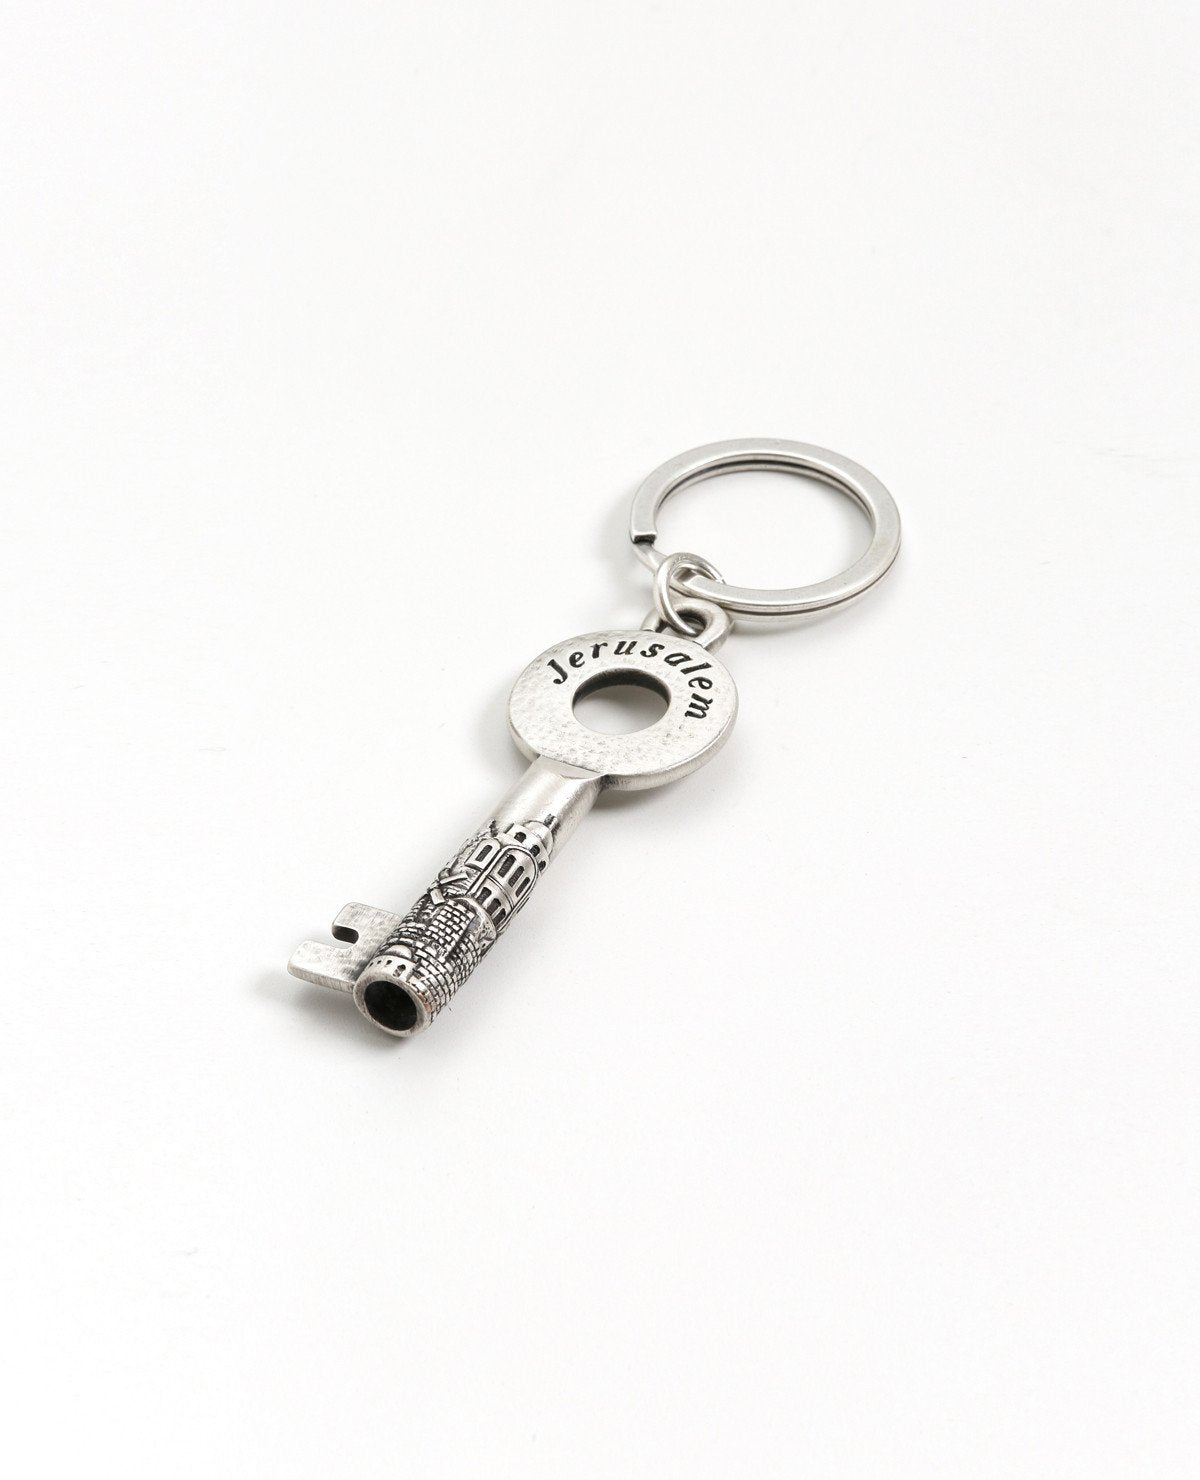 An artistic and uniquely designed sterling silver coated keychain. Engraved on the keys handle is the word "Jerusalem", and along its side an embossed image of the Jerusalem landscape. The keychain is strong and reliable and will make a charming gift and serve as a daily reminder for Jerusalem lovers, in Israel and abroad.   Length: 8 cm  Width: 3 cm